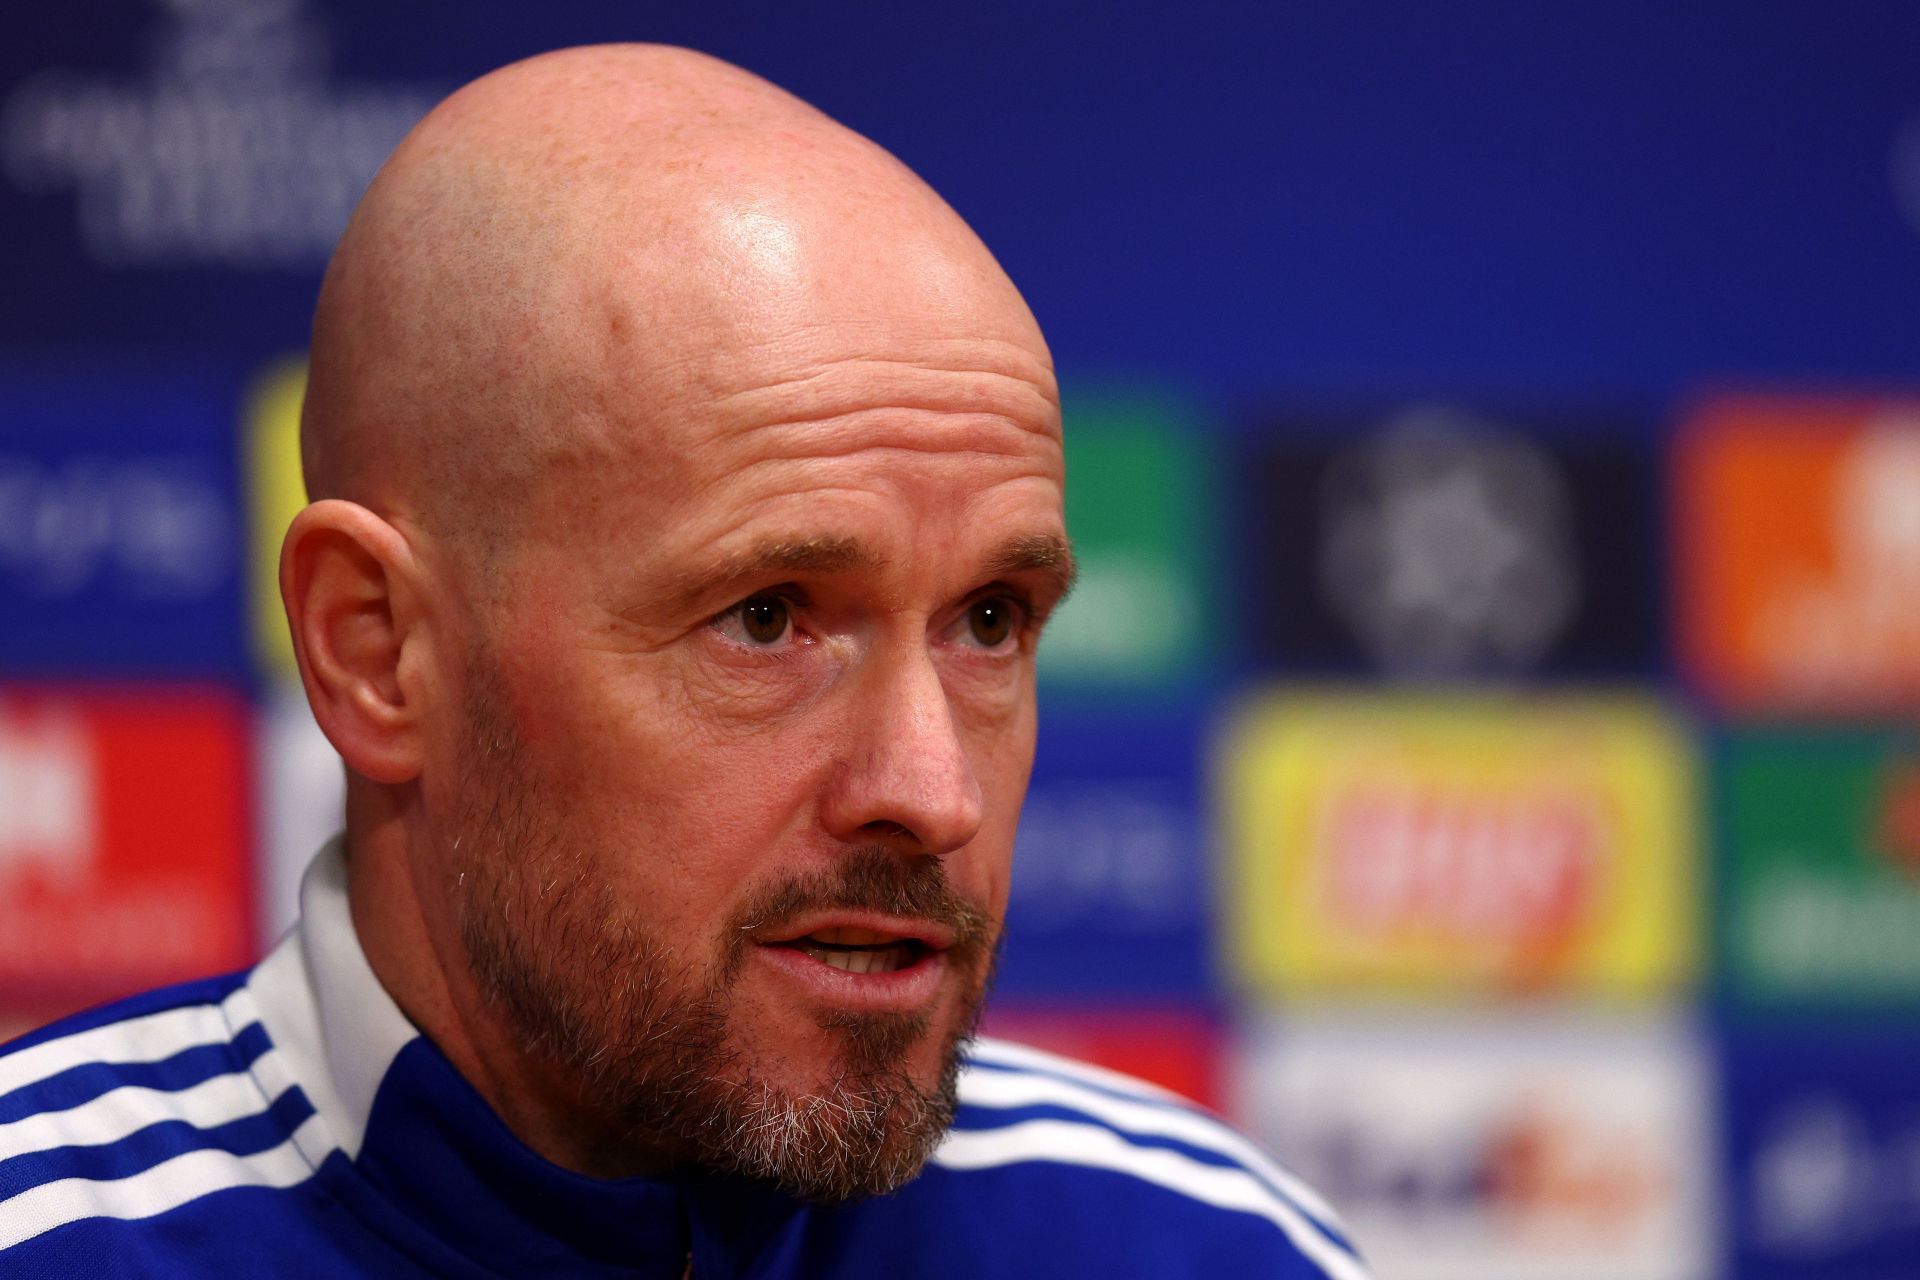 Erik ten Hag will take charge at Old Trafford this summer.